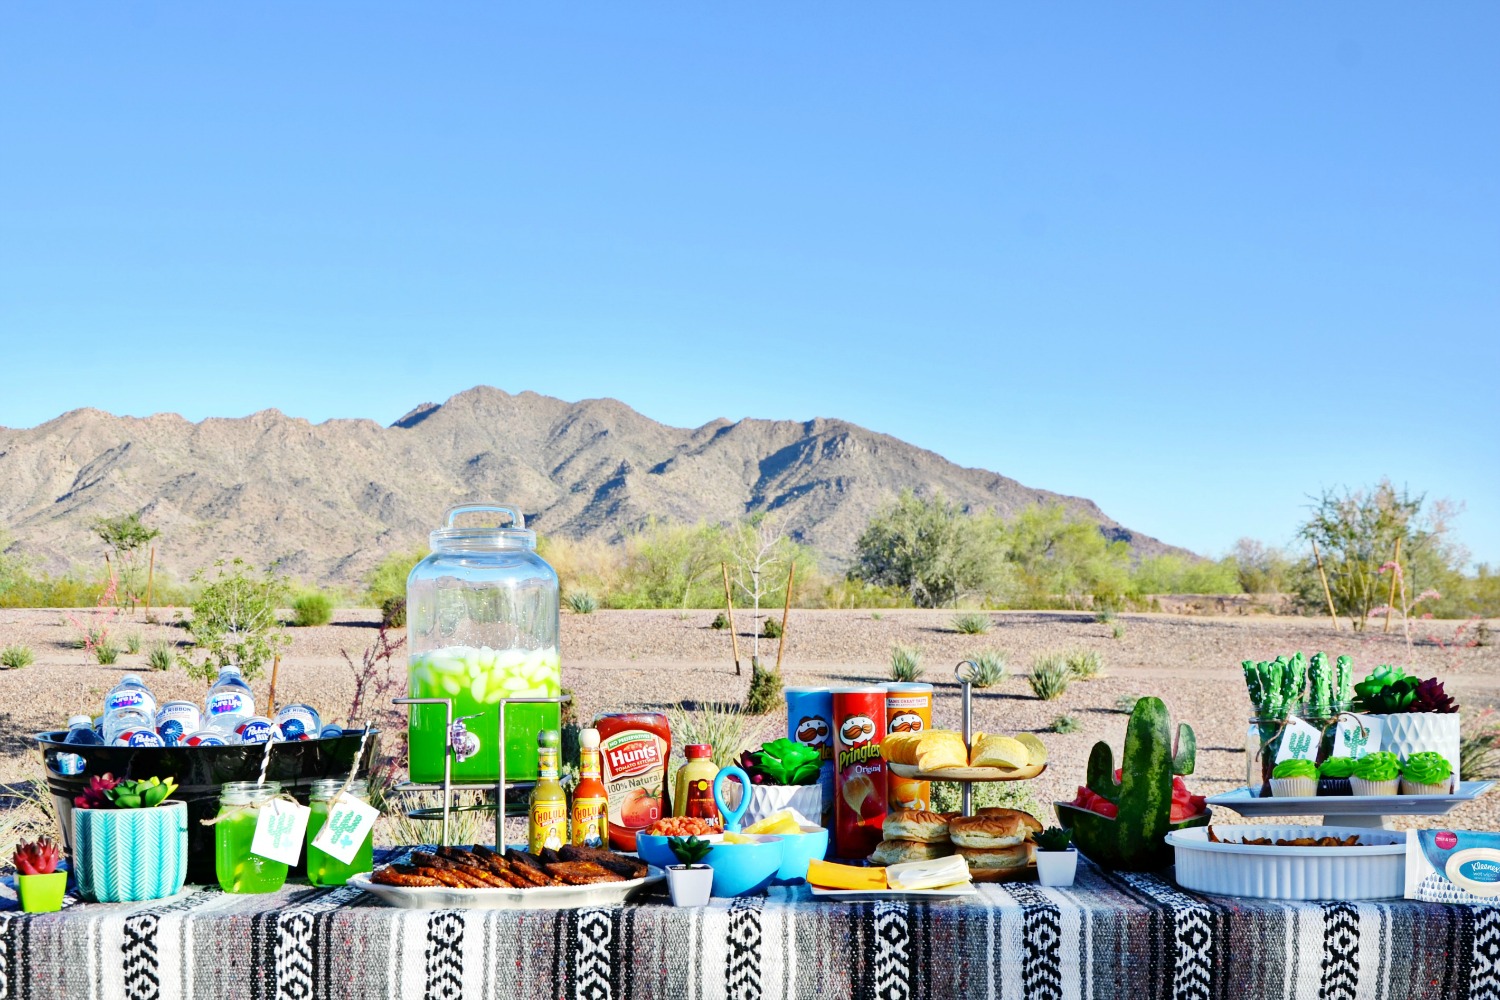 Set up an over the top meal spread at your Dinner in the Desert Burger Bar Party.